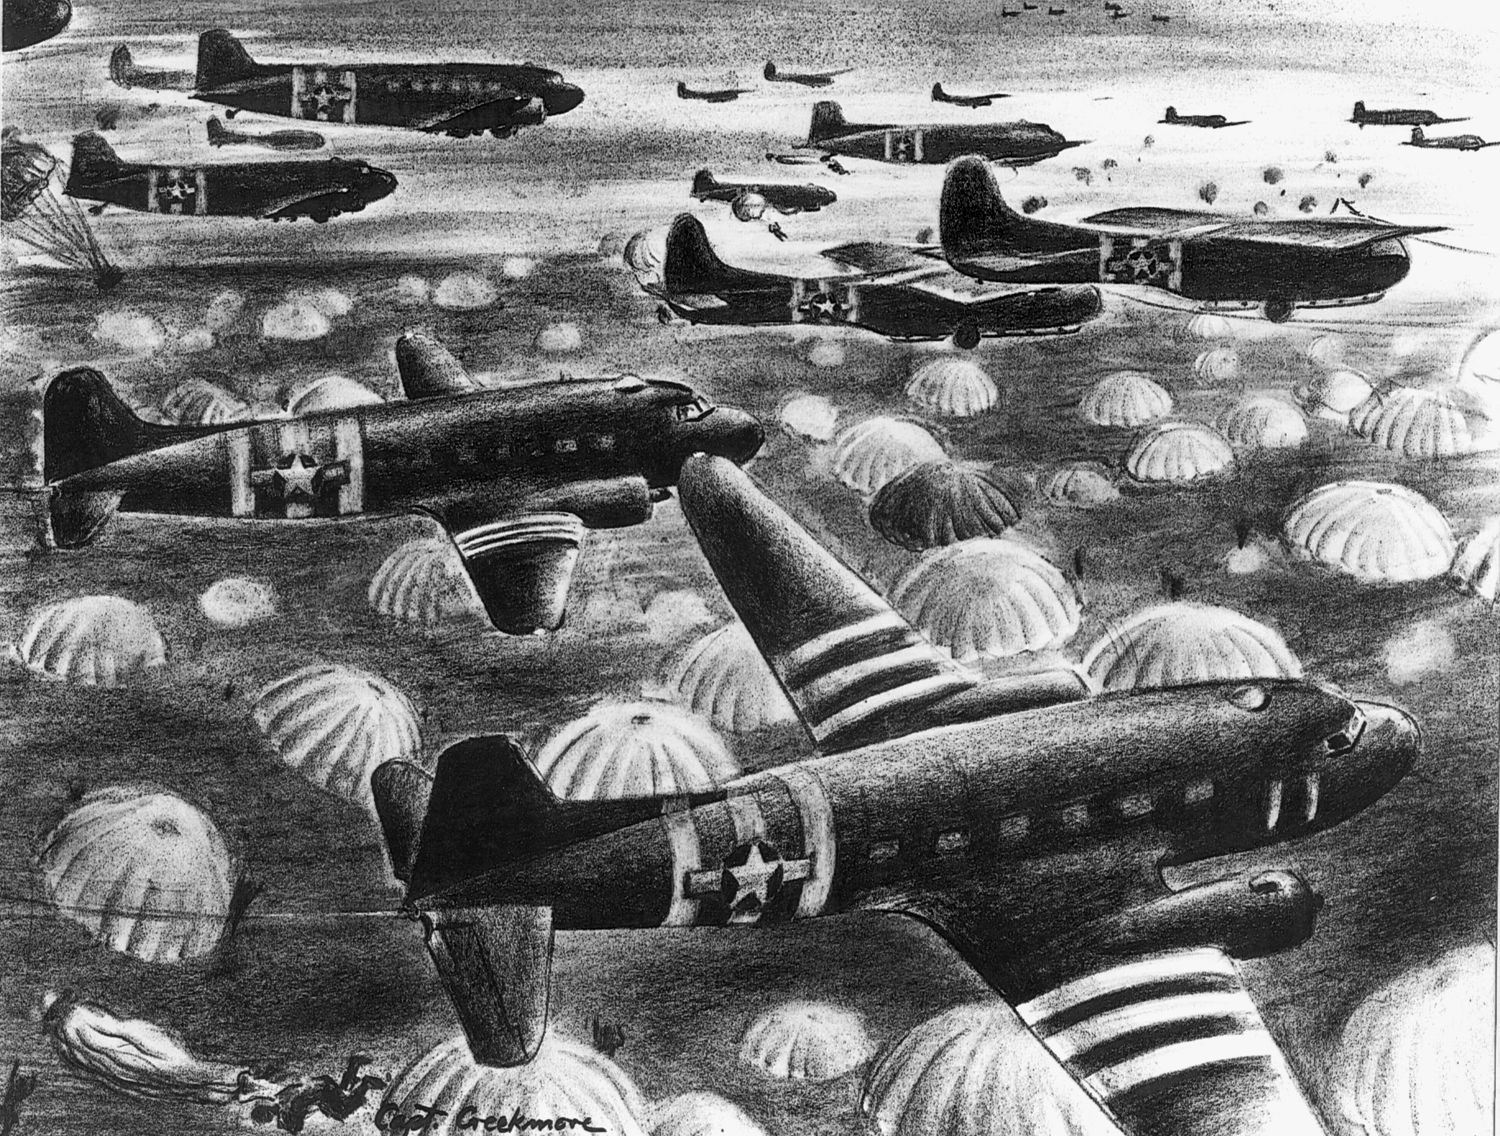 Their faces displaying a variety of emotions, these paratroopers from the 101st Airborne prepare to take off in a C-47 “Skytrain” on D-Day. In a somewhat fanciful representation of D-Day, a combat artist shows Waco CG-4A gliders mixed in with the aerial invasion force.